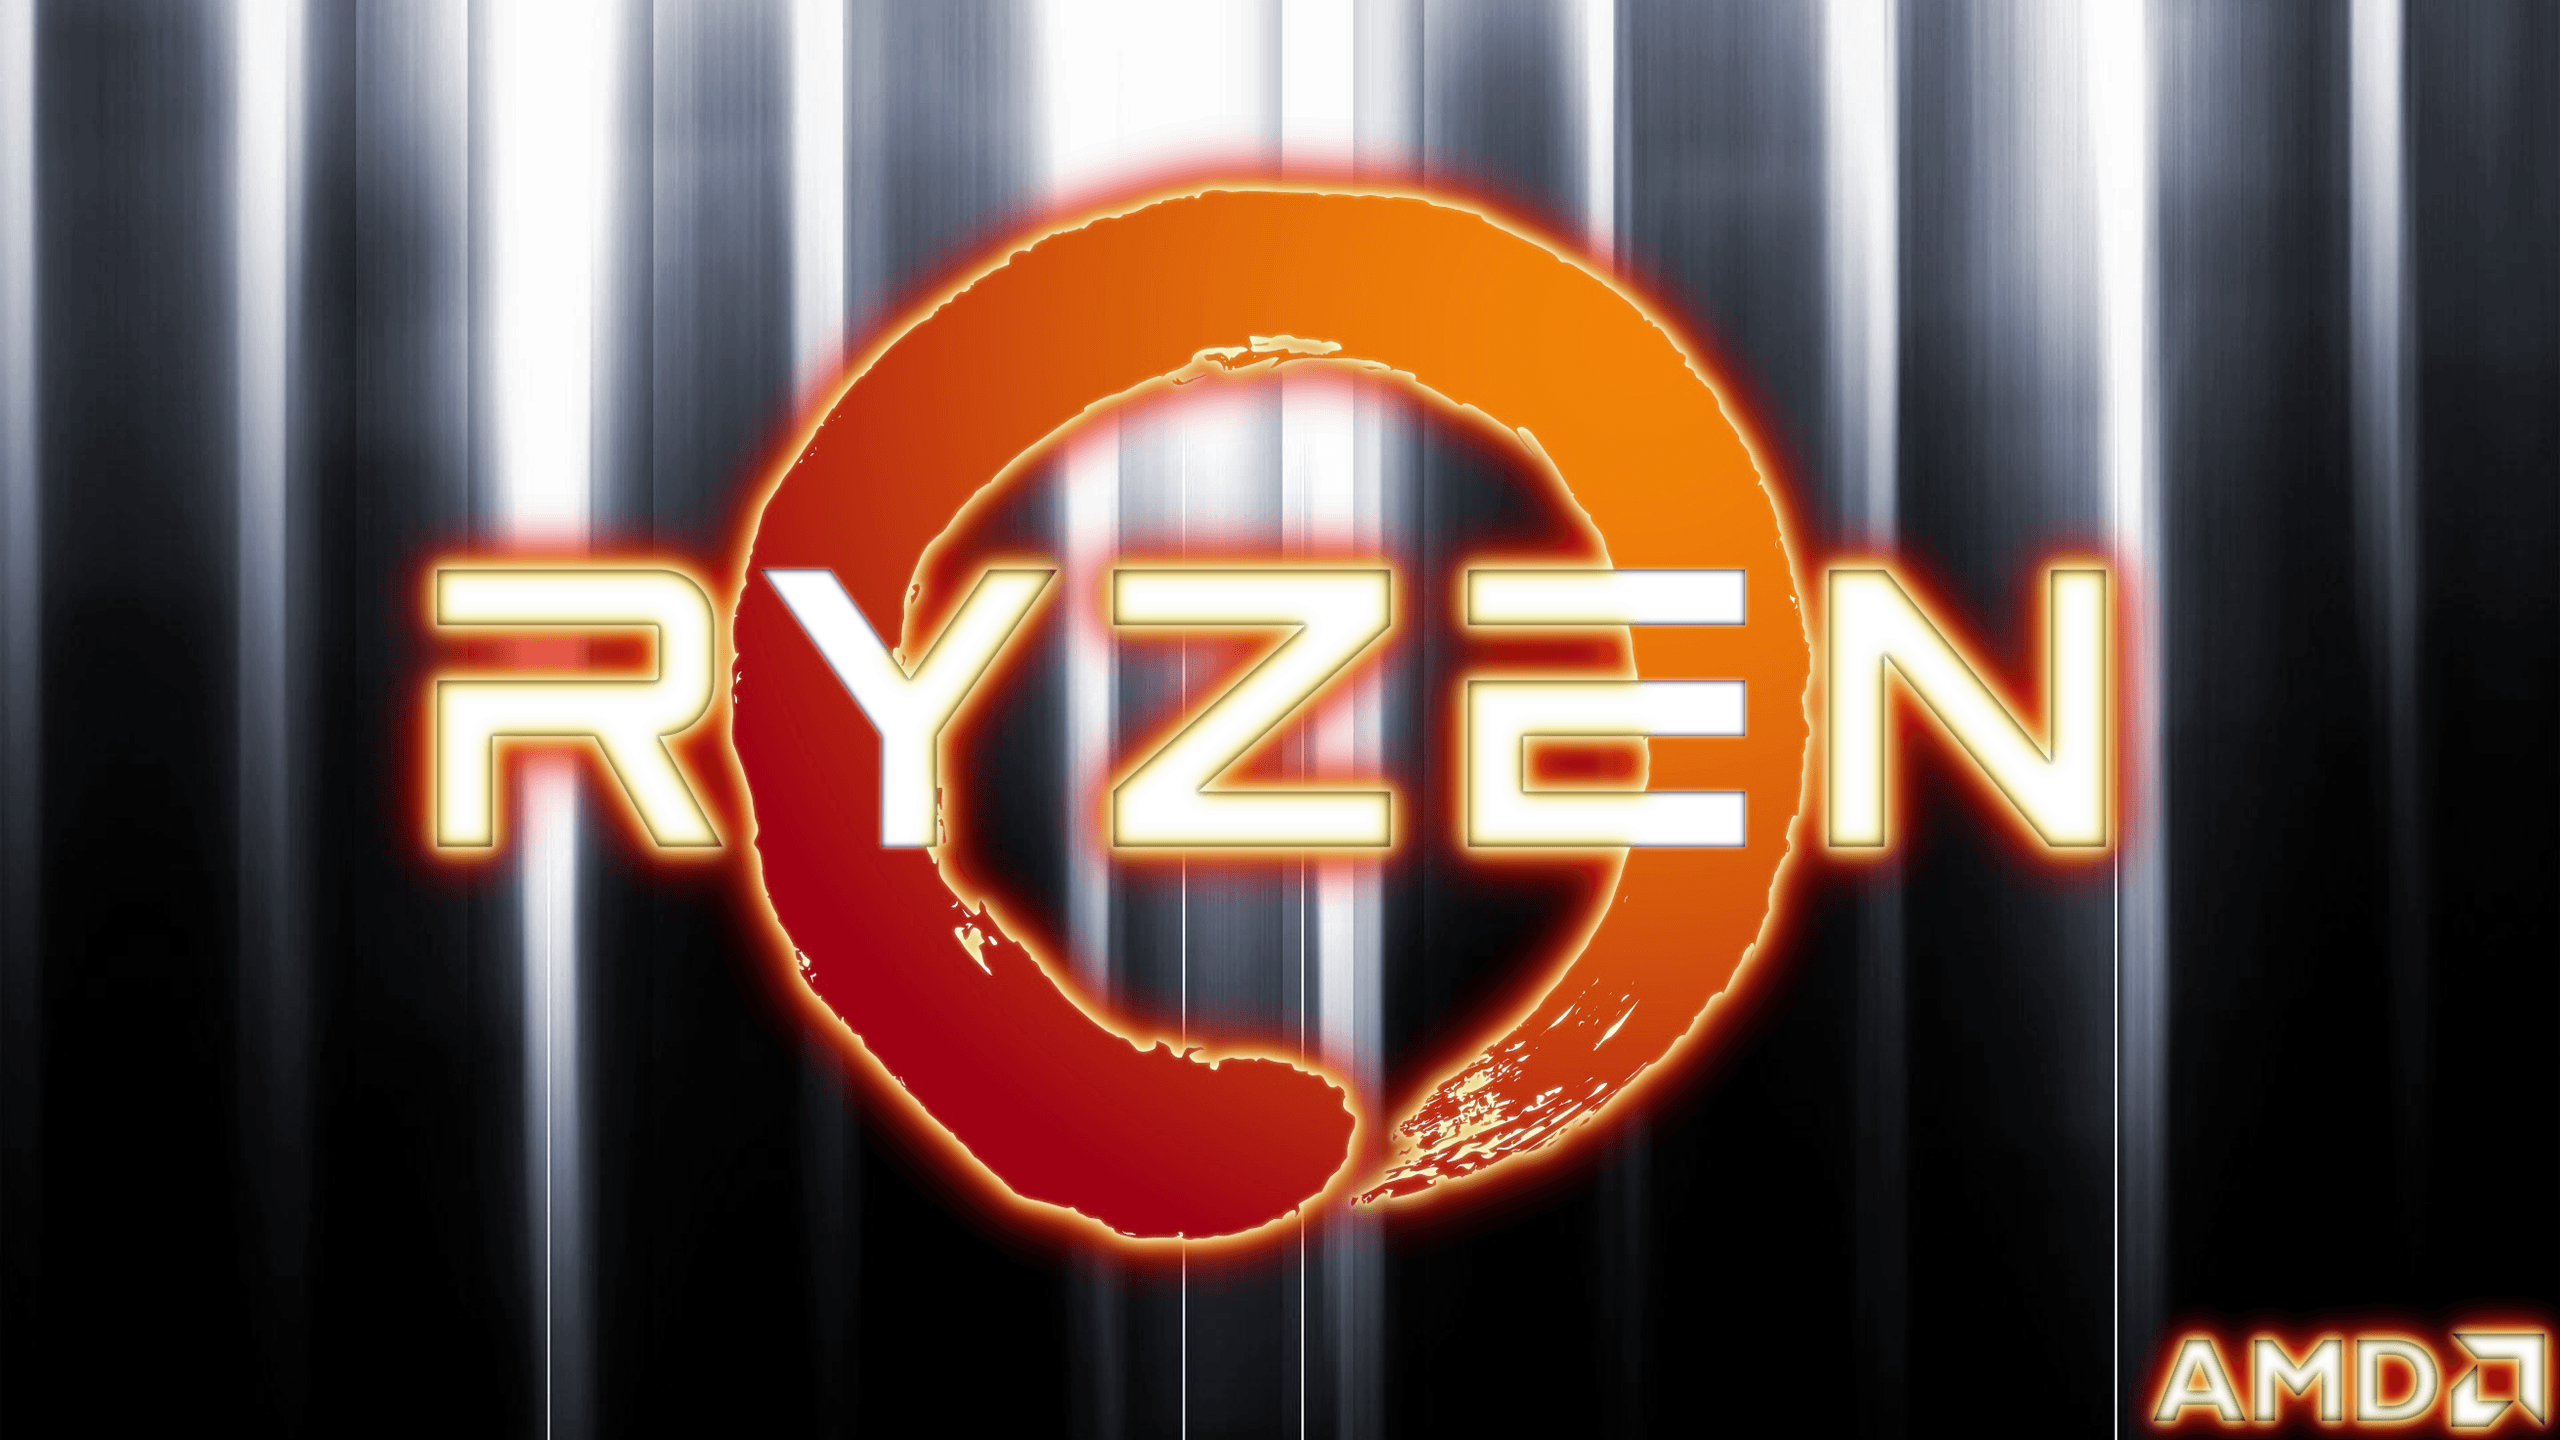 I Made A Wallpaper For When I Upgrade To Ryzen (x Post From R Wallpaper)